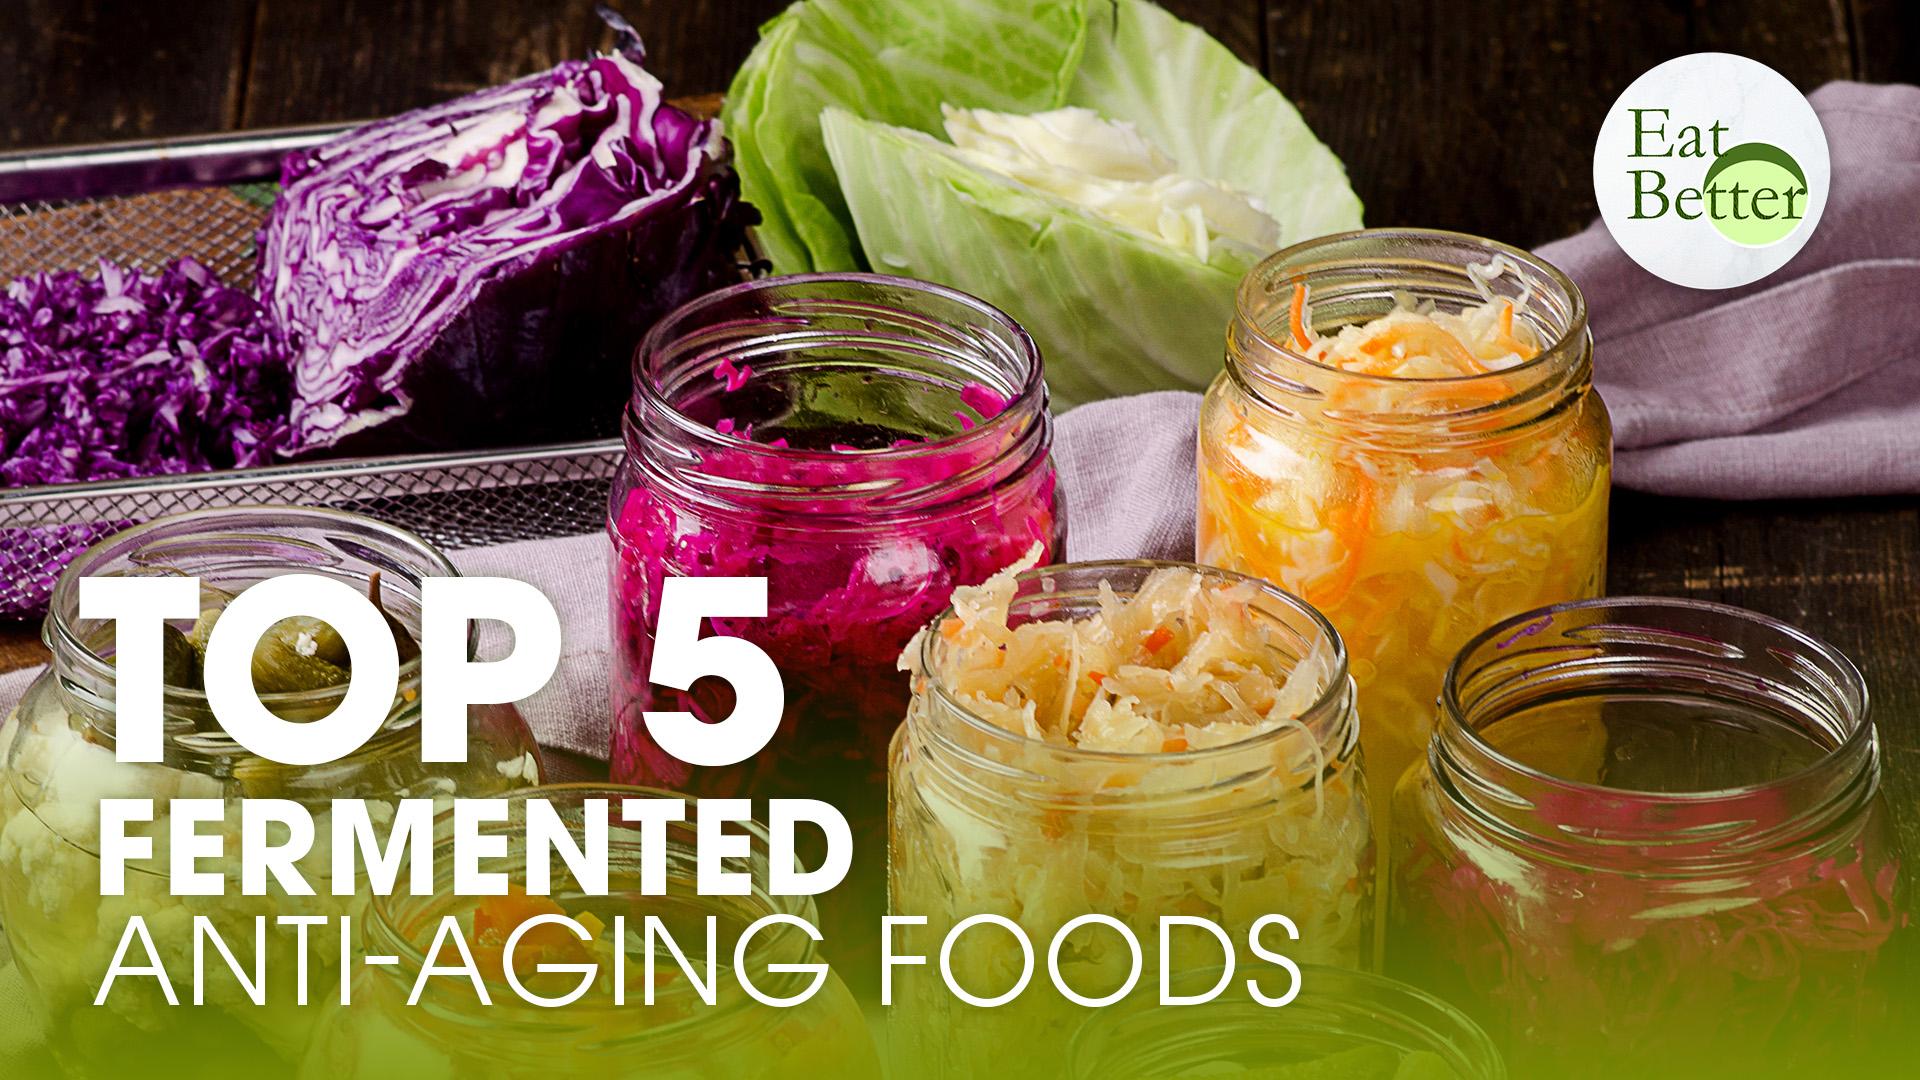 Fermented foods and anti-aging